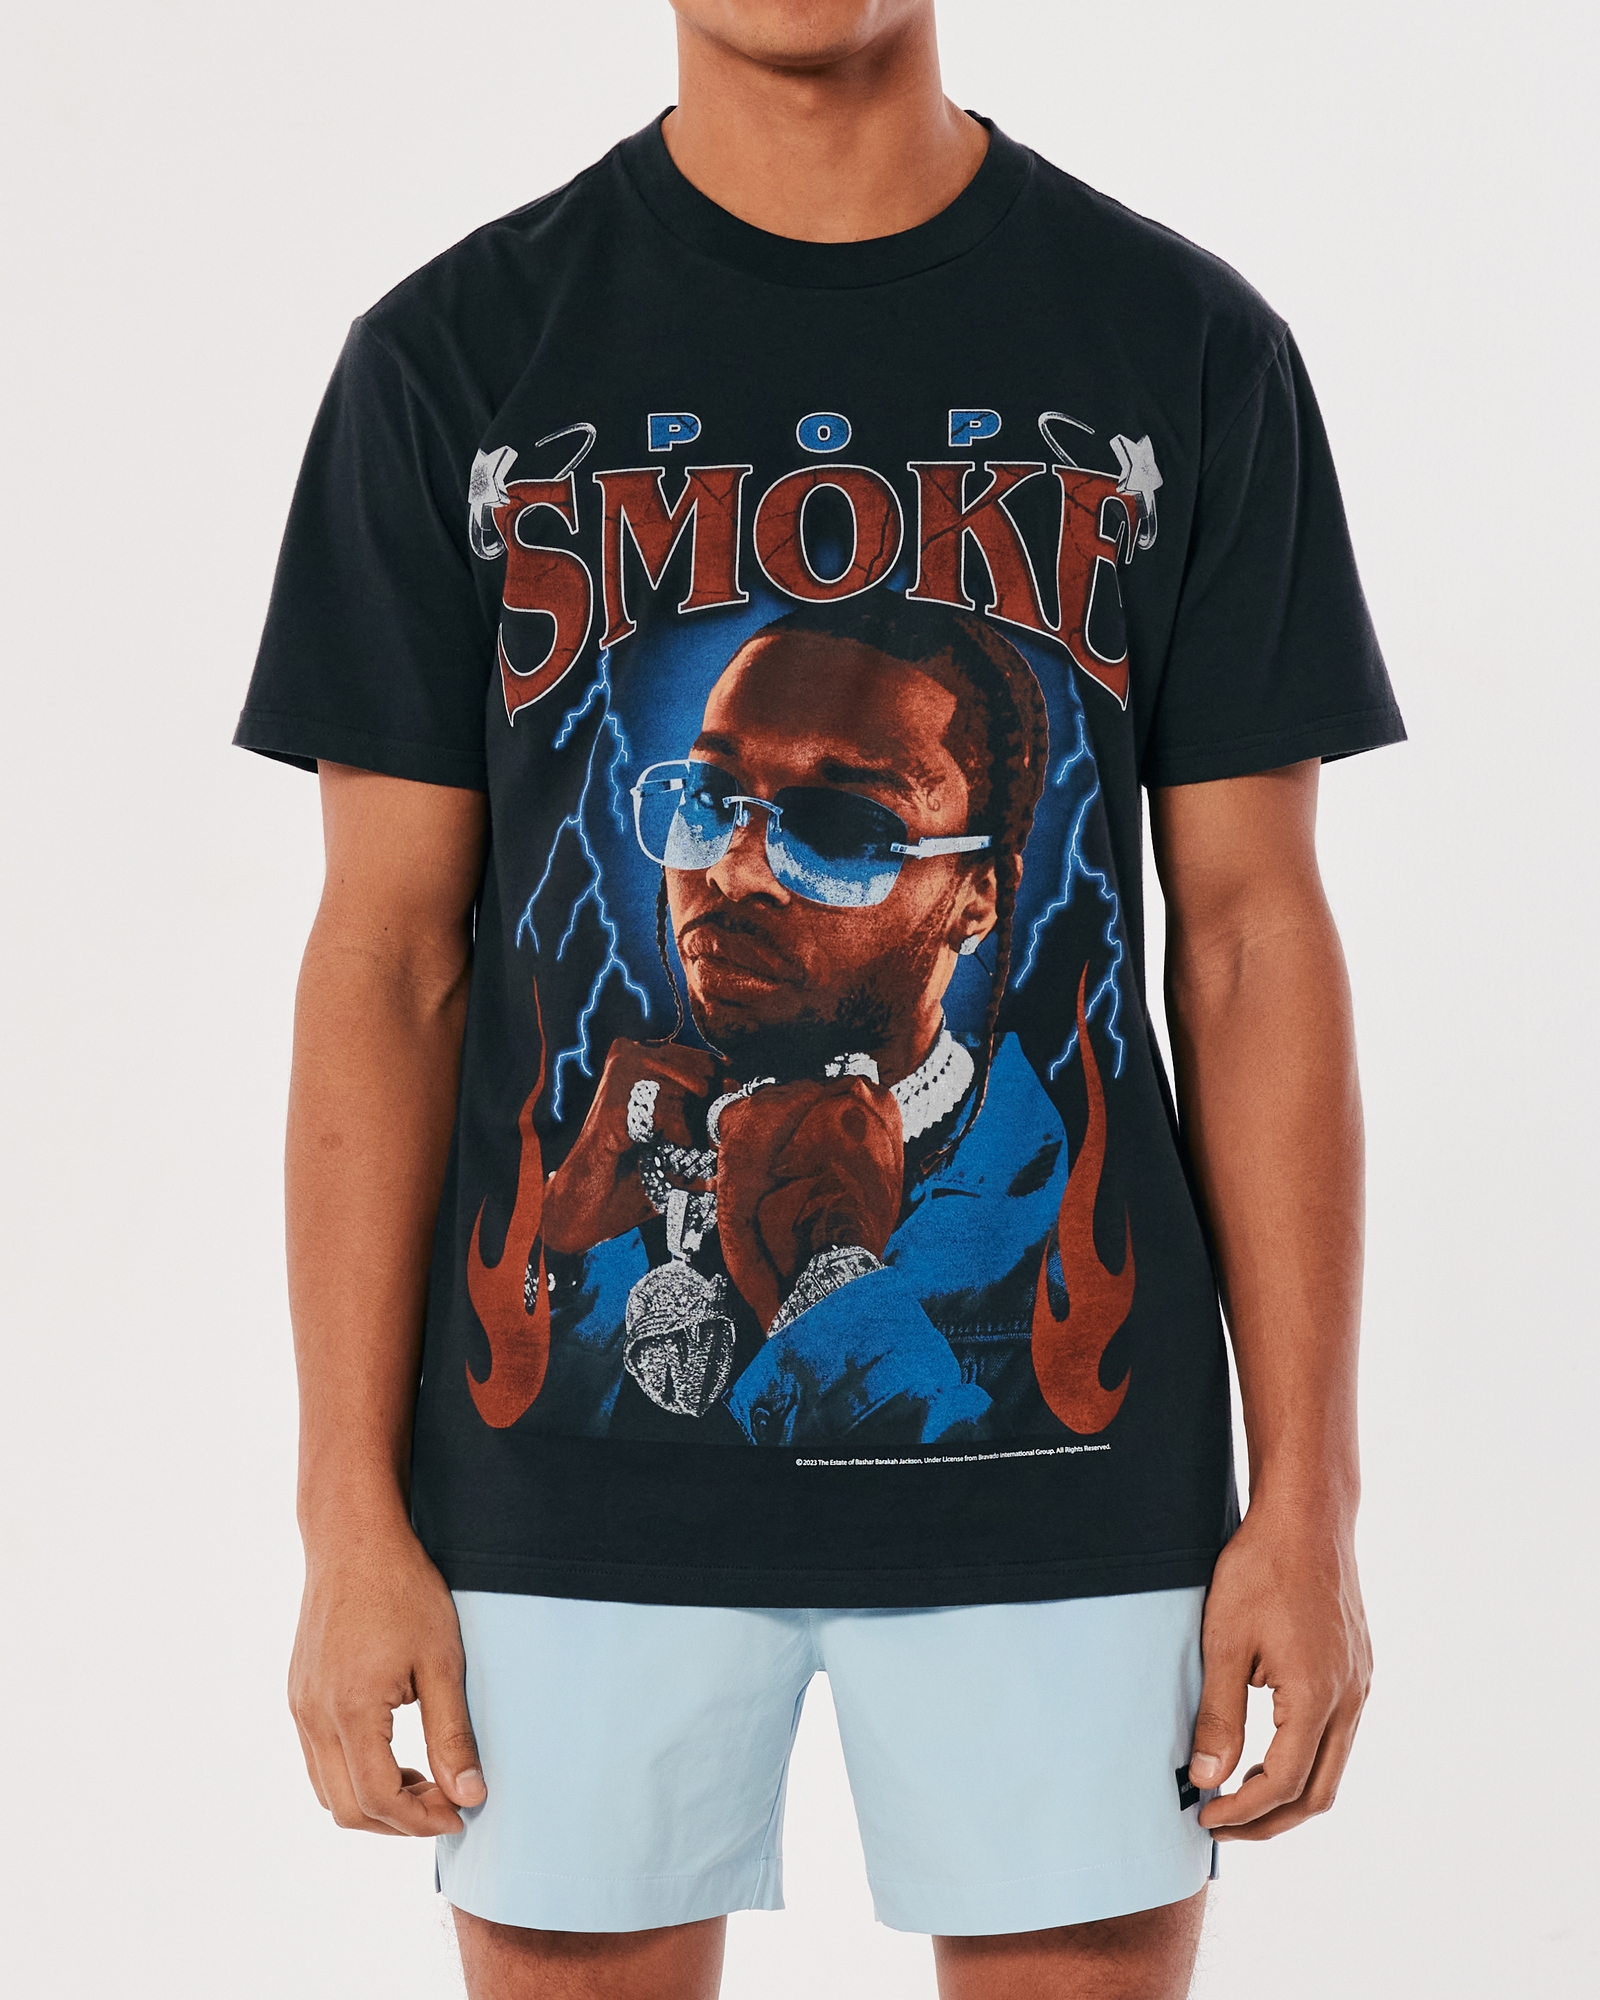 Men's Relaxed Pop Smoke Graphic Tee, Men's Clearance